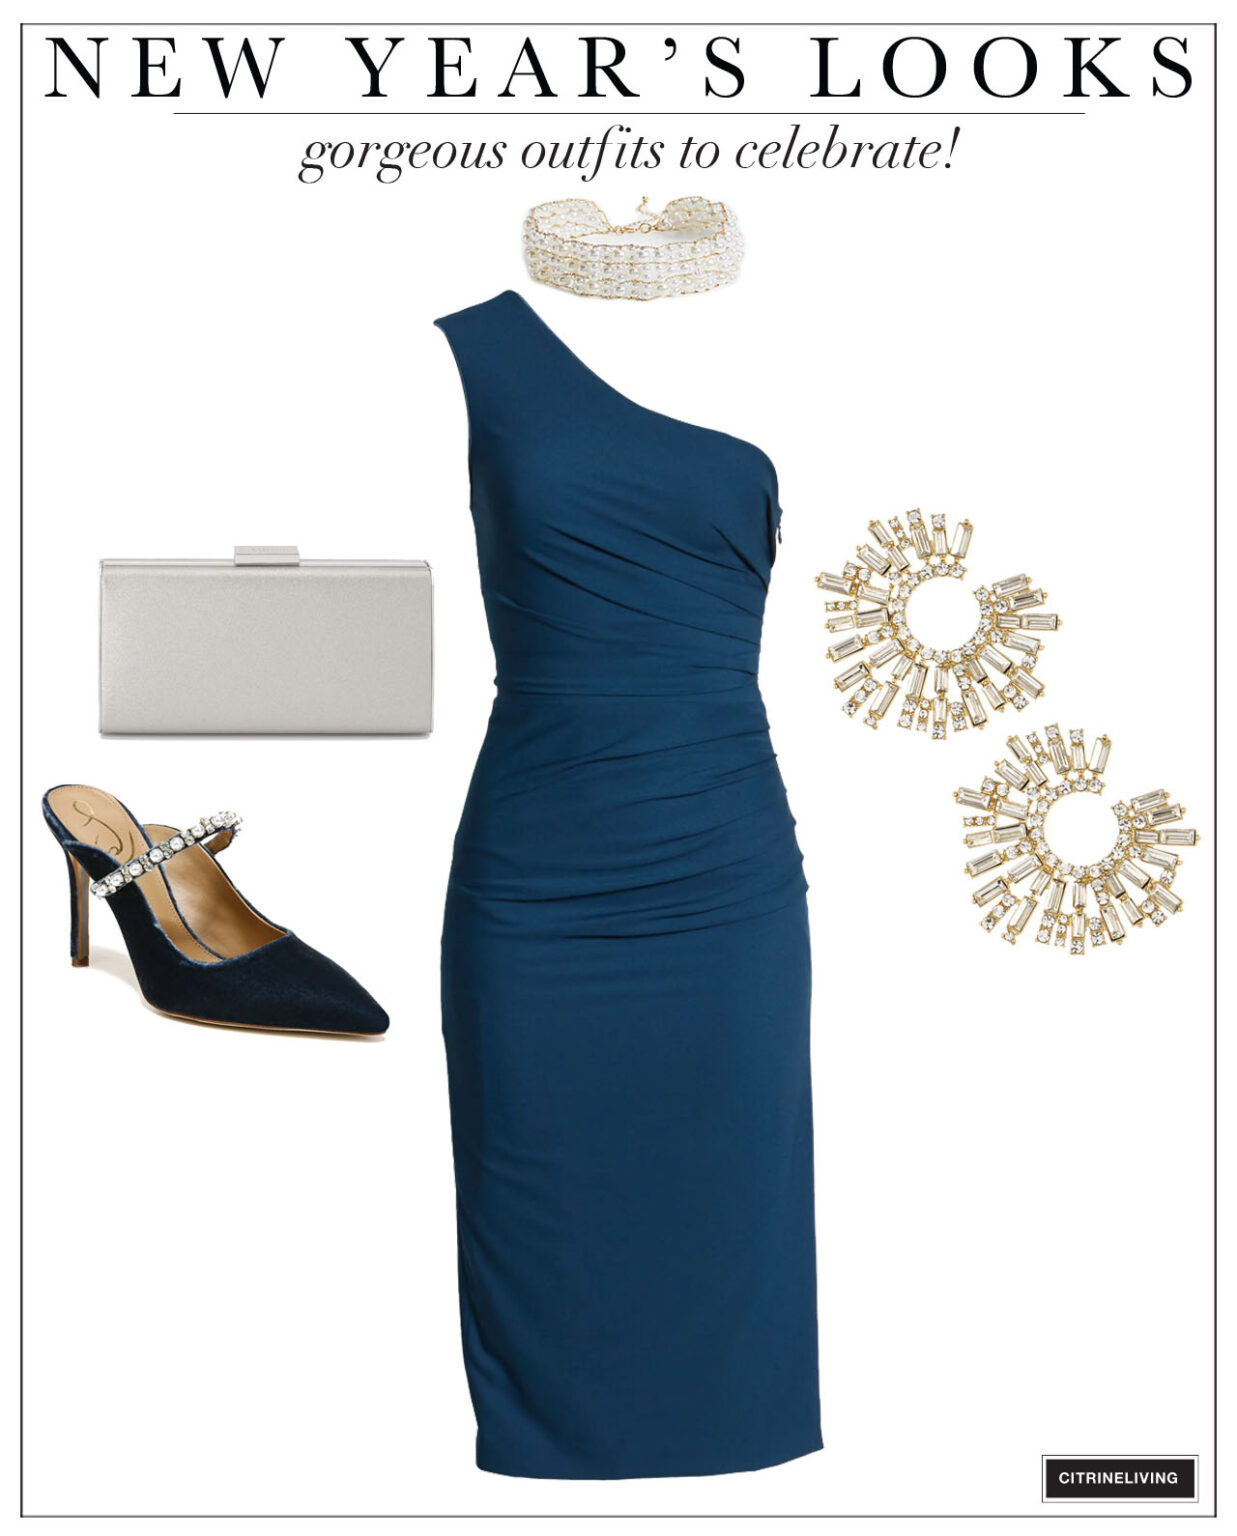 NEW YEAR'S EVE OUTFITS | CITRINELIVING